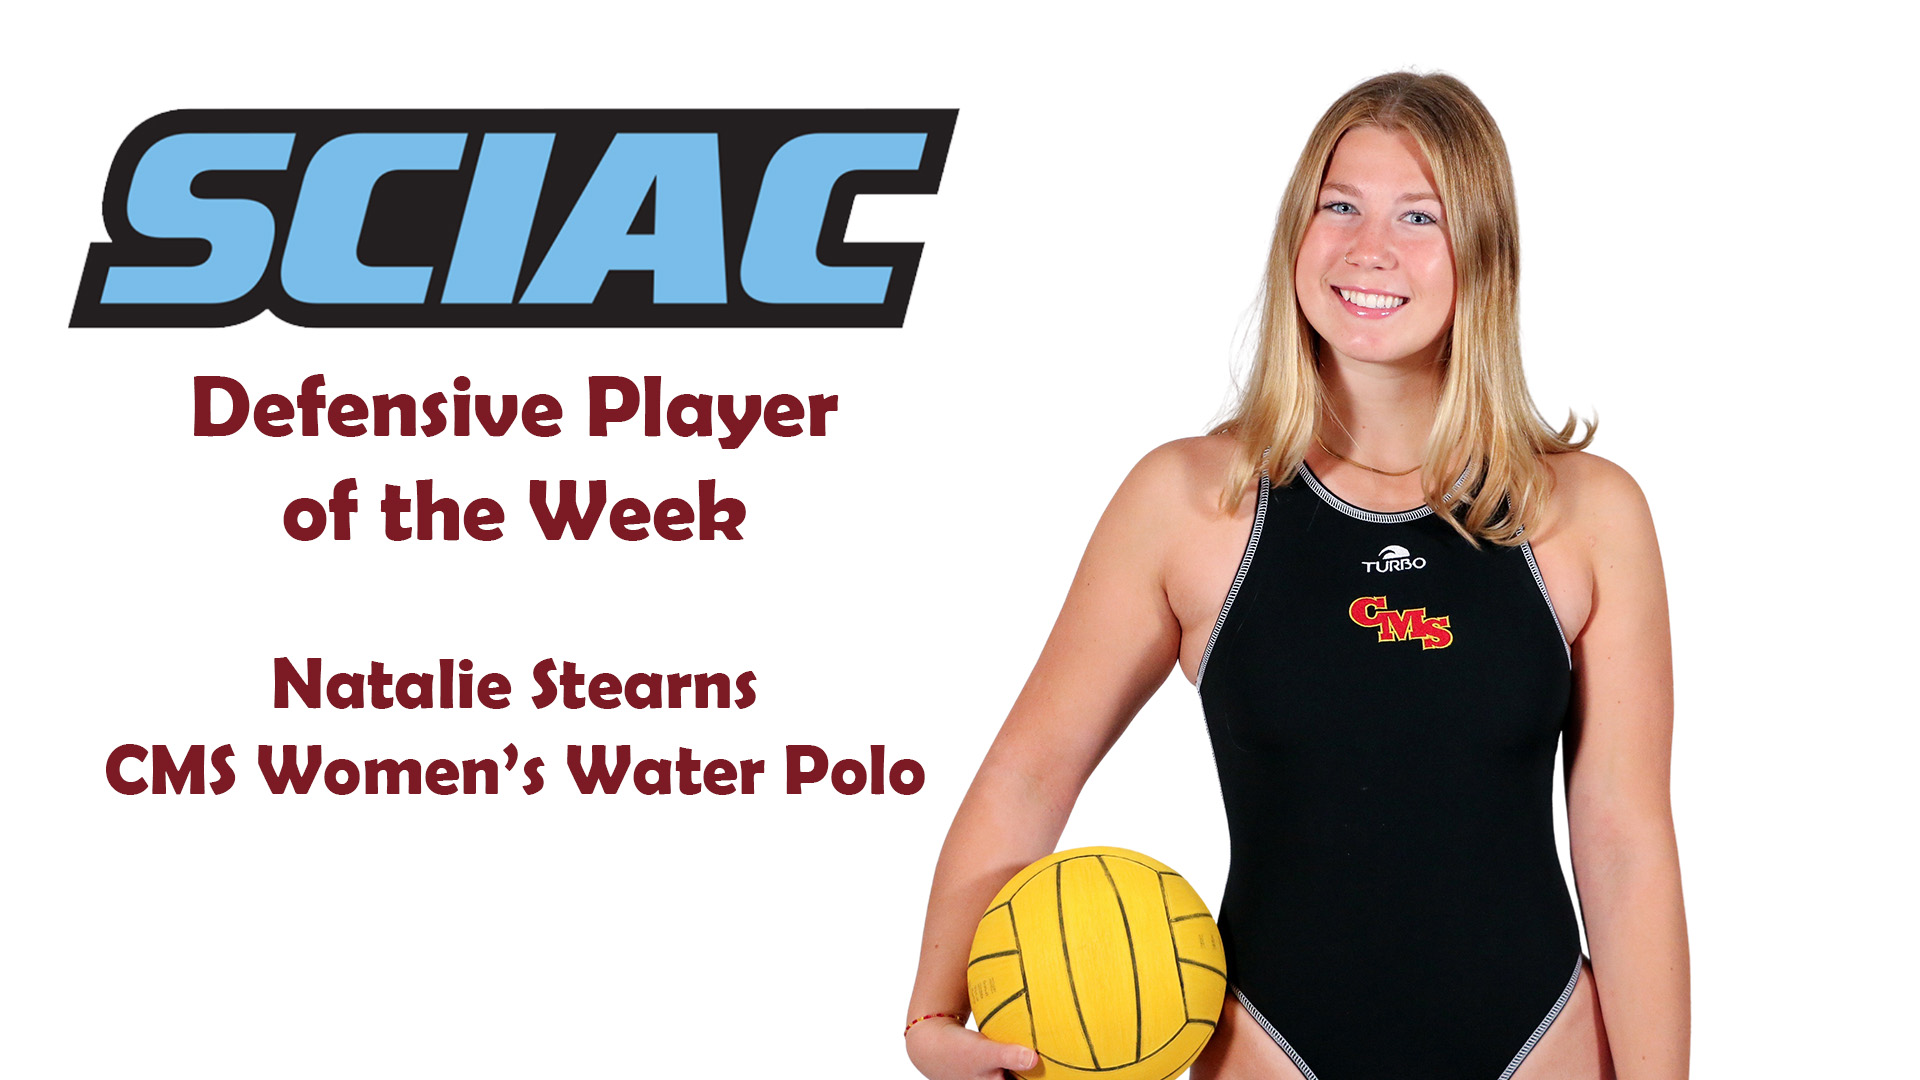 posed shot of Natalie Stearns with the SCIAC logo